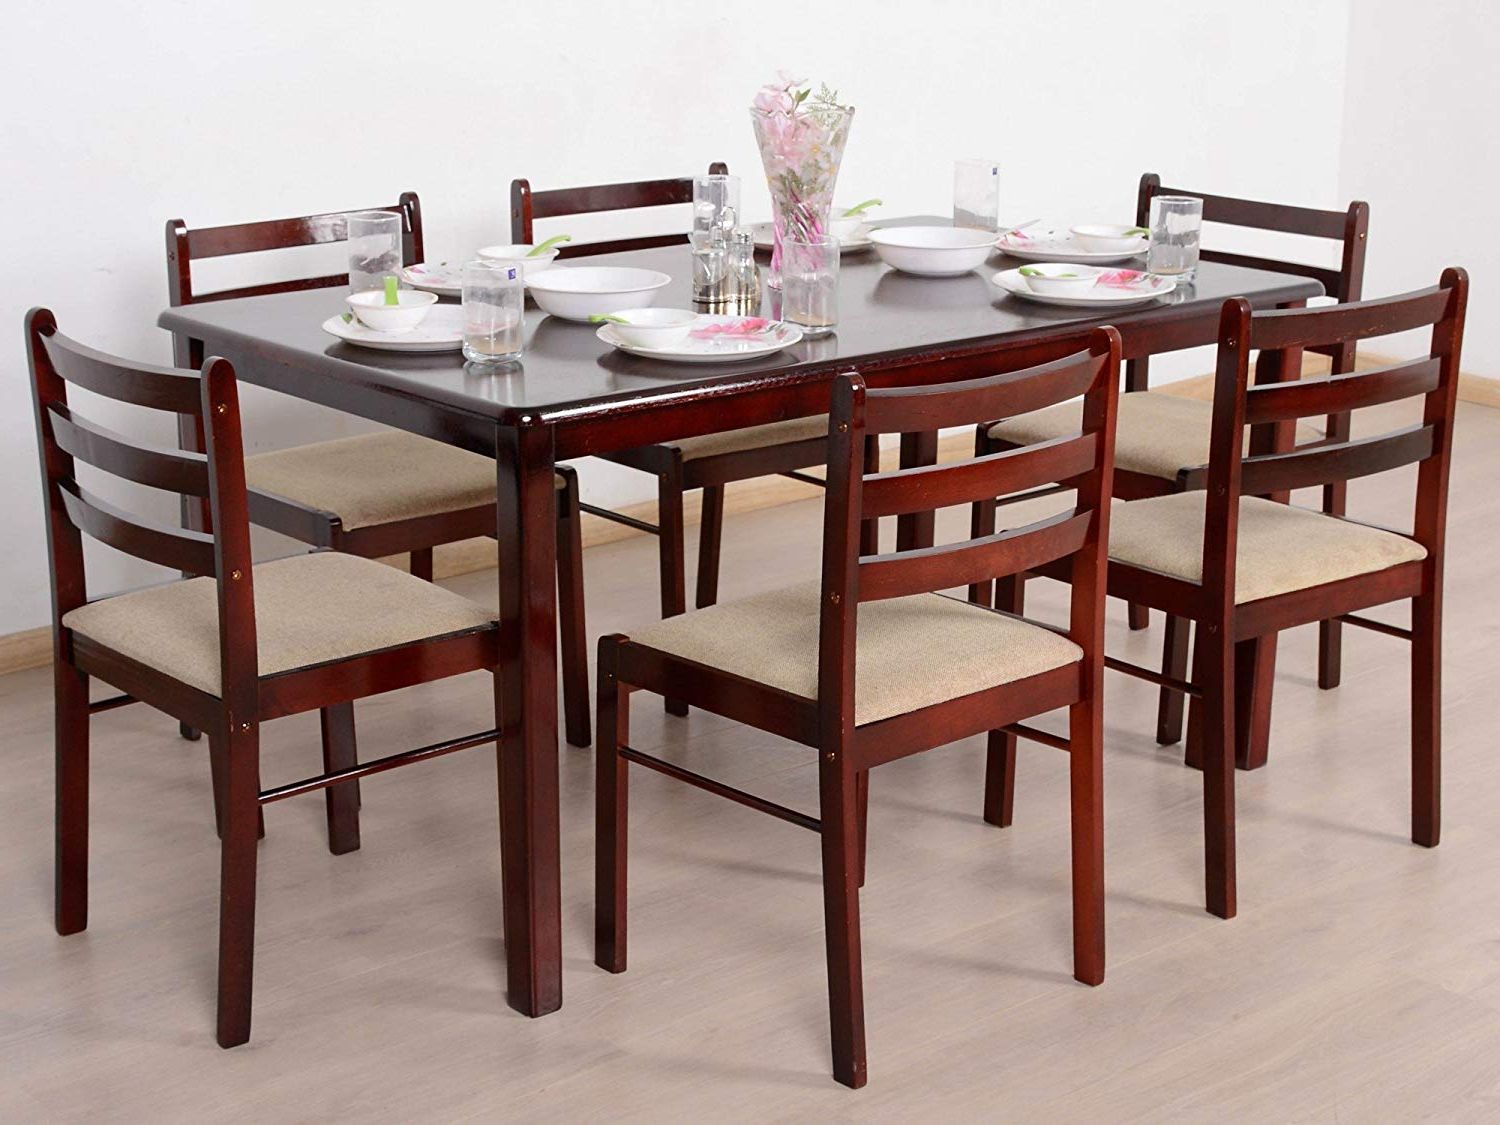 6 Seat Parson Seat Dining Room